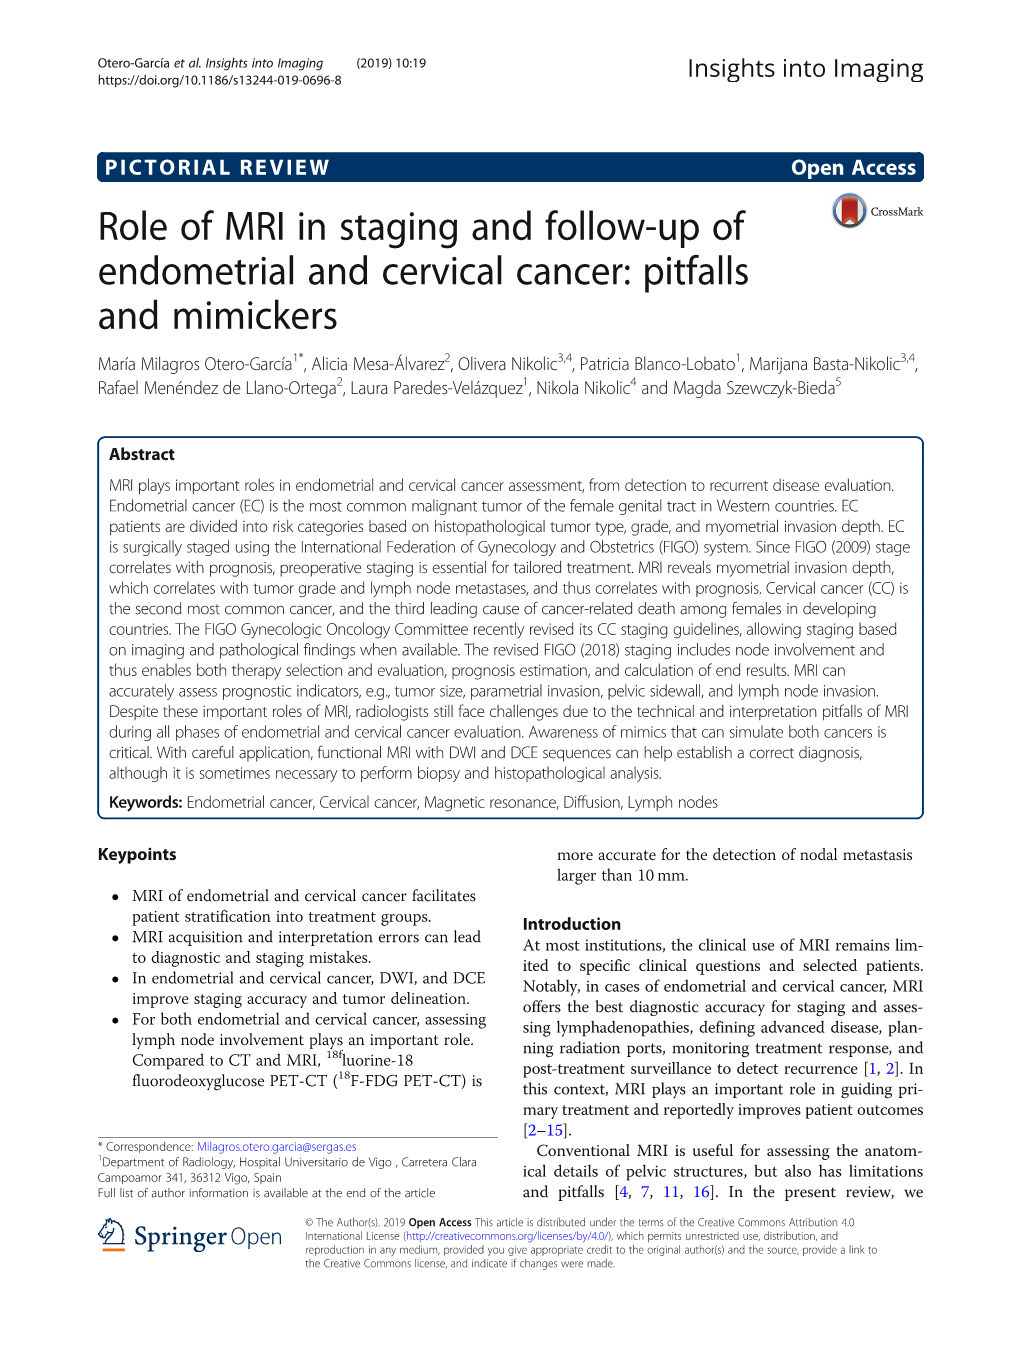 Role of MRI in Staging and Follow-Up of Endometrial and Cervical Cancer